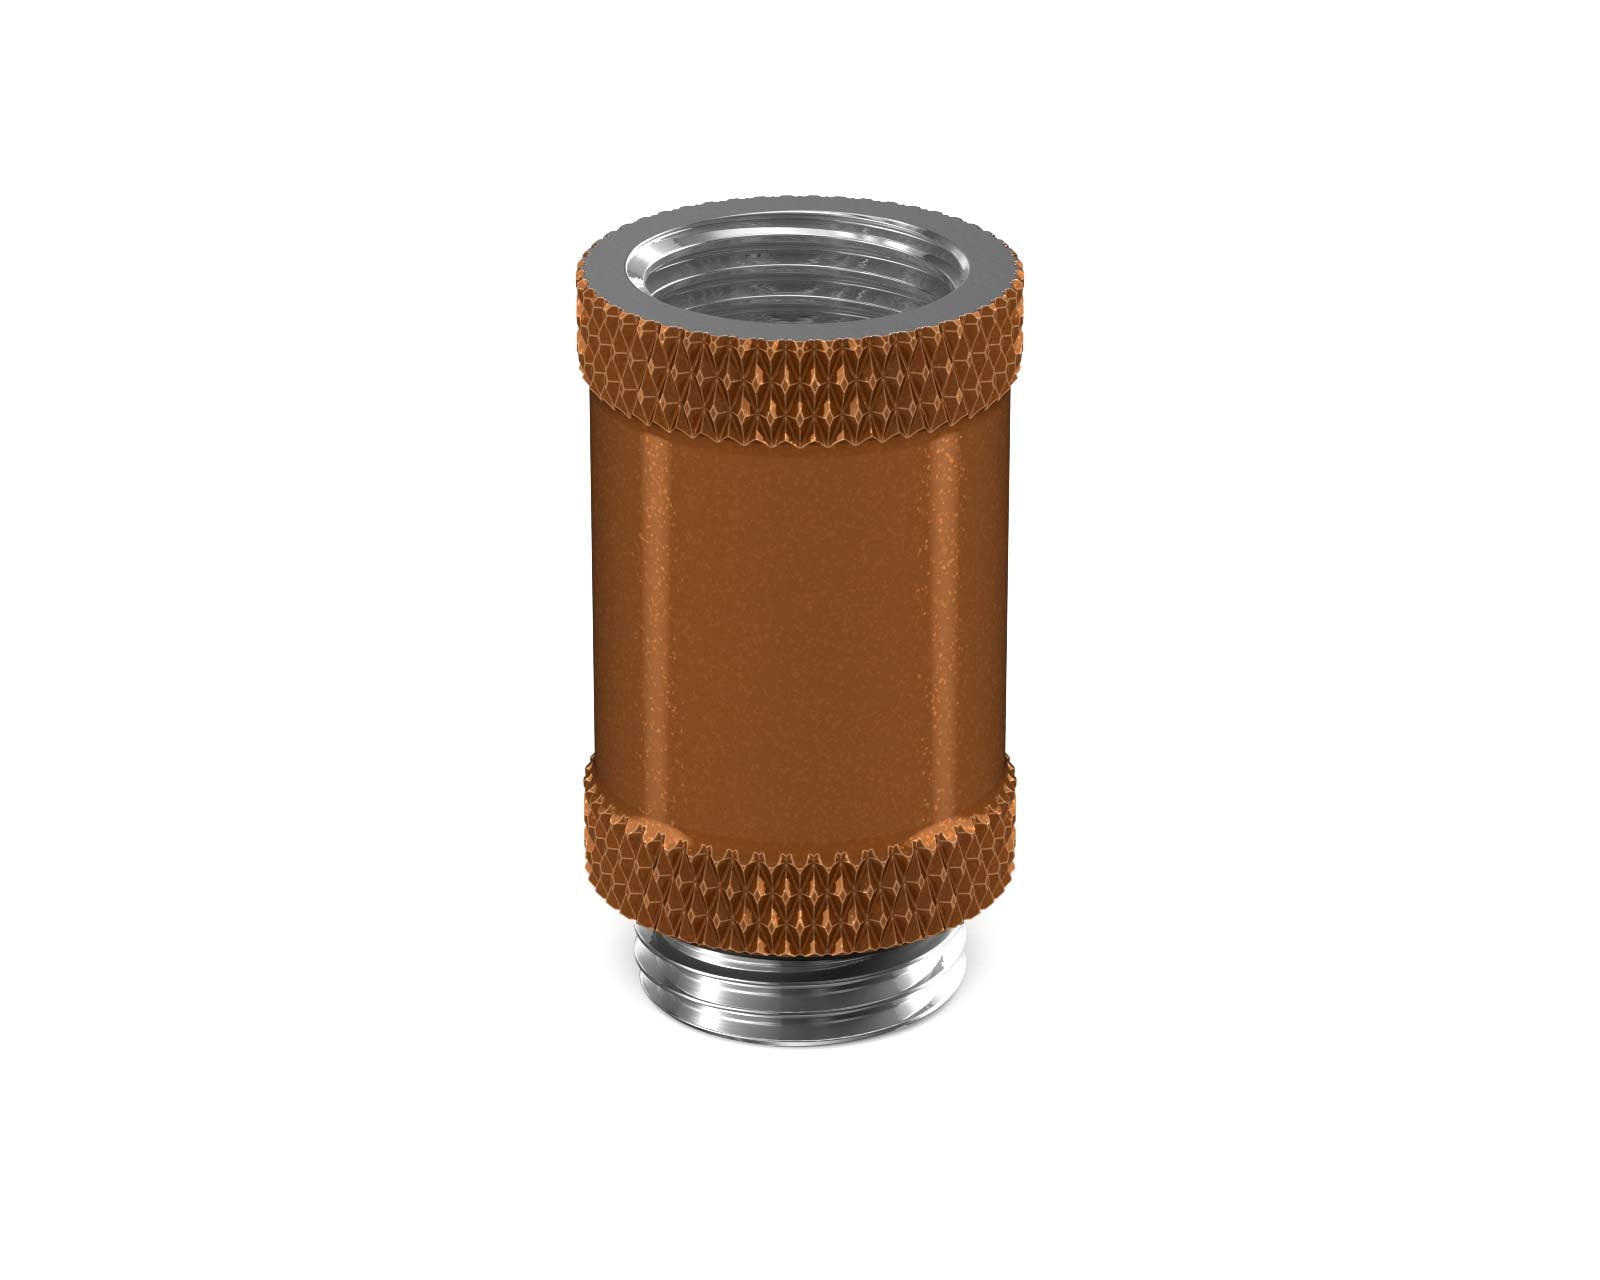 PrimoChill Male to Female G 1/4in. 25mm SX Extension Coupler - PrimoChill - KEEPING IT COOL Copper